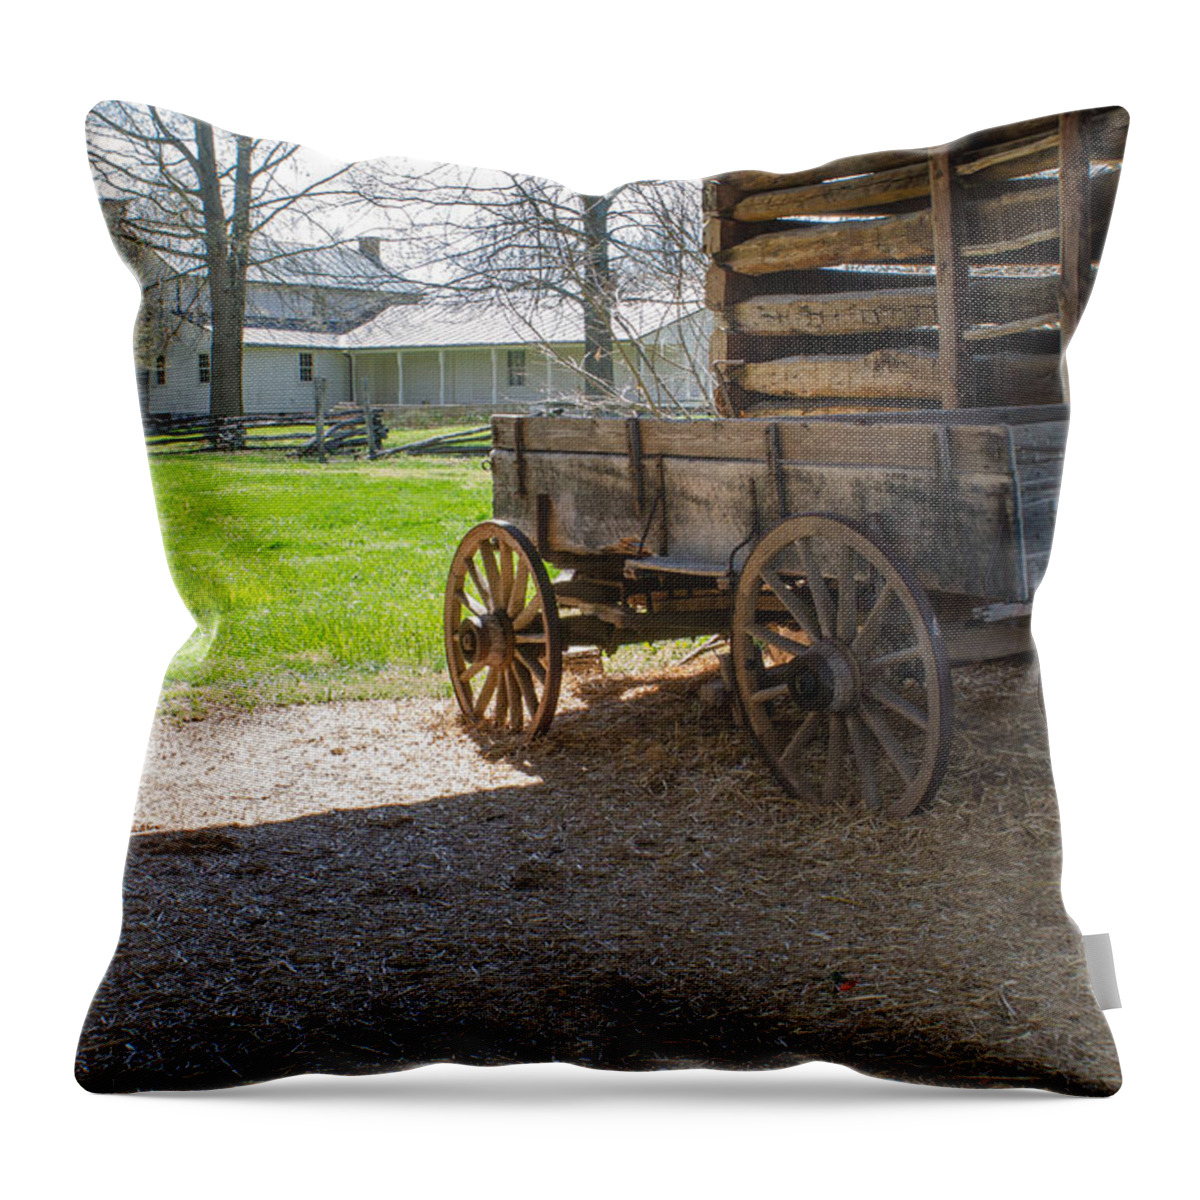 Tipton-hayes Throw Pillow featuring the photograph Tipton Hayes Wagon 1 by Douglas Barnett